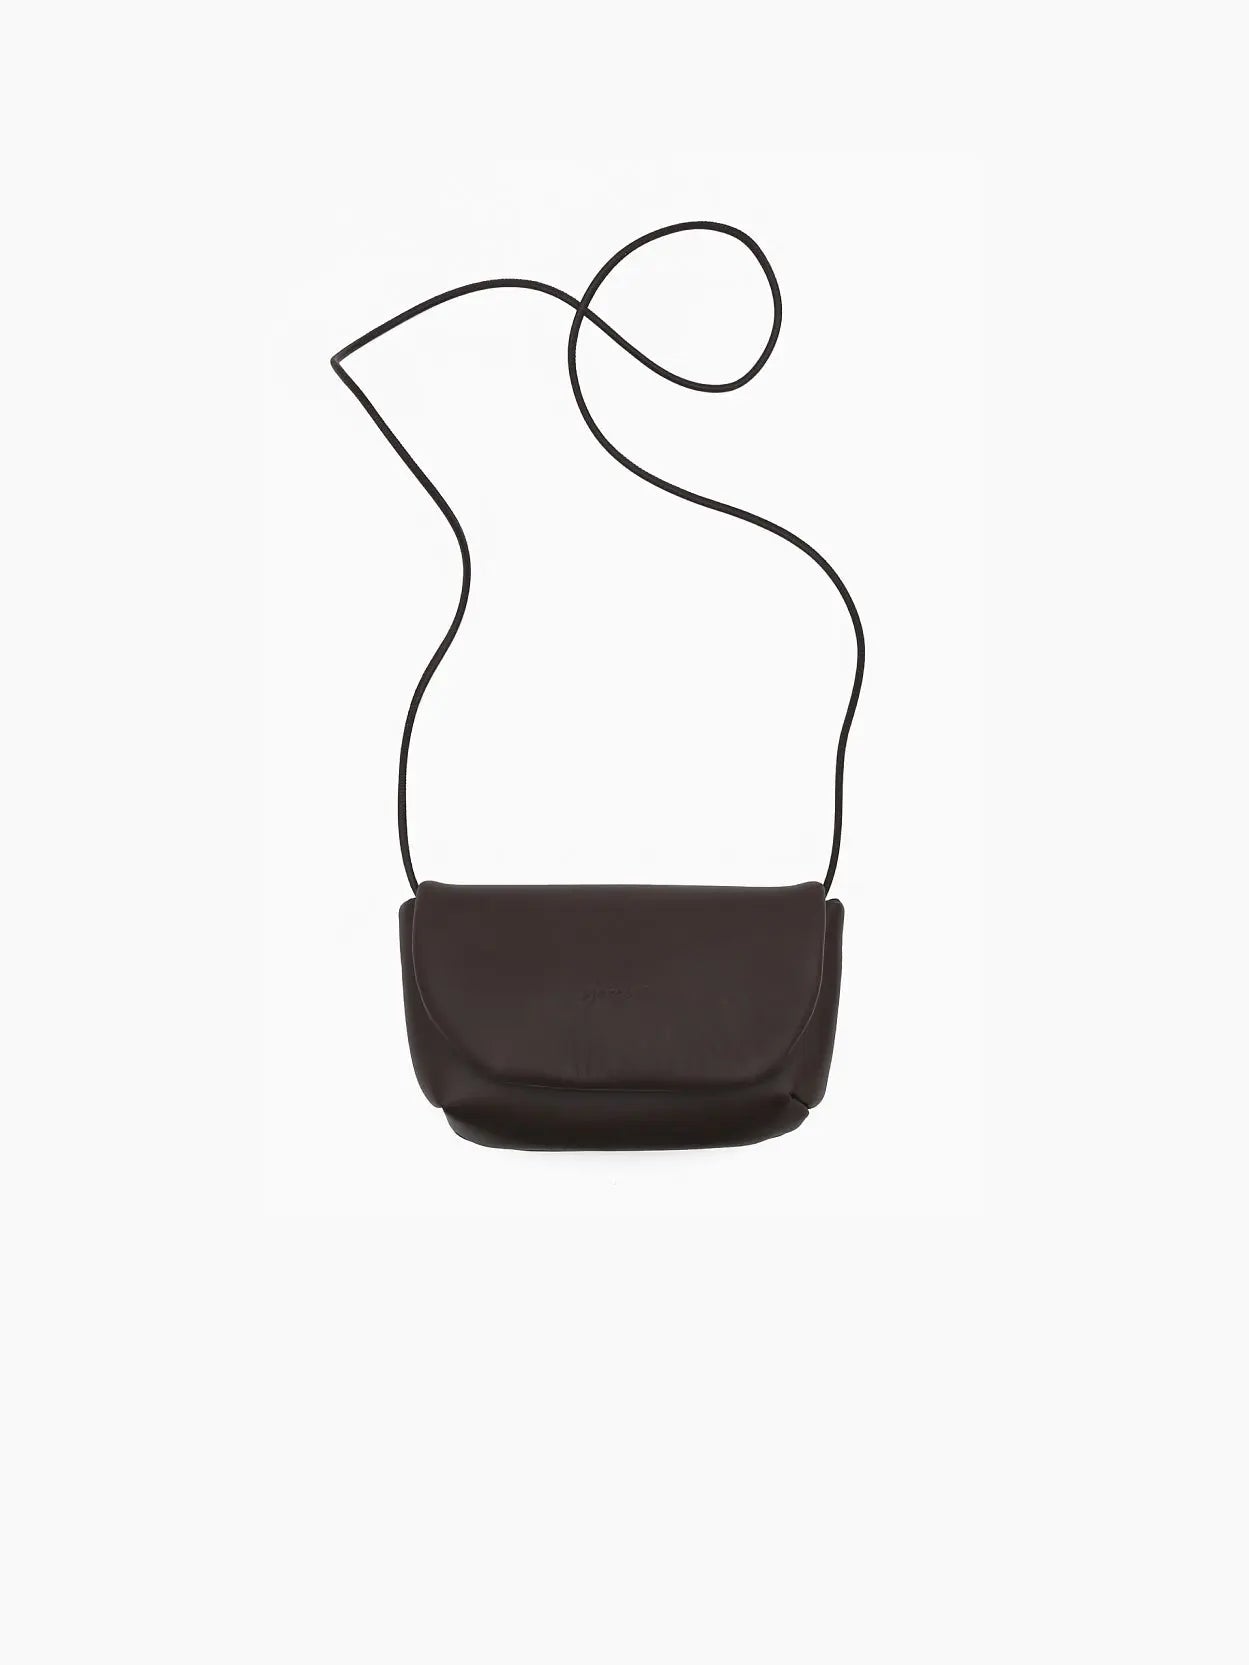 A small, dark brown leather crossbody bag with a curved flap closure. The Anonima Clutch Dark Brown by Marsèll, available at Bassalstore in Barcelona, has a smooth texture and a minimalist design against a plain white background.